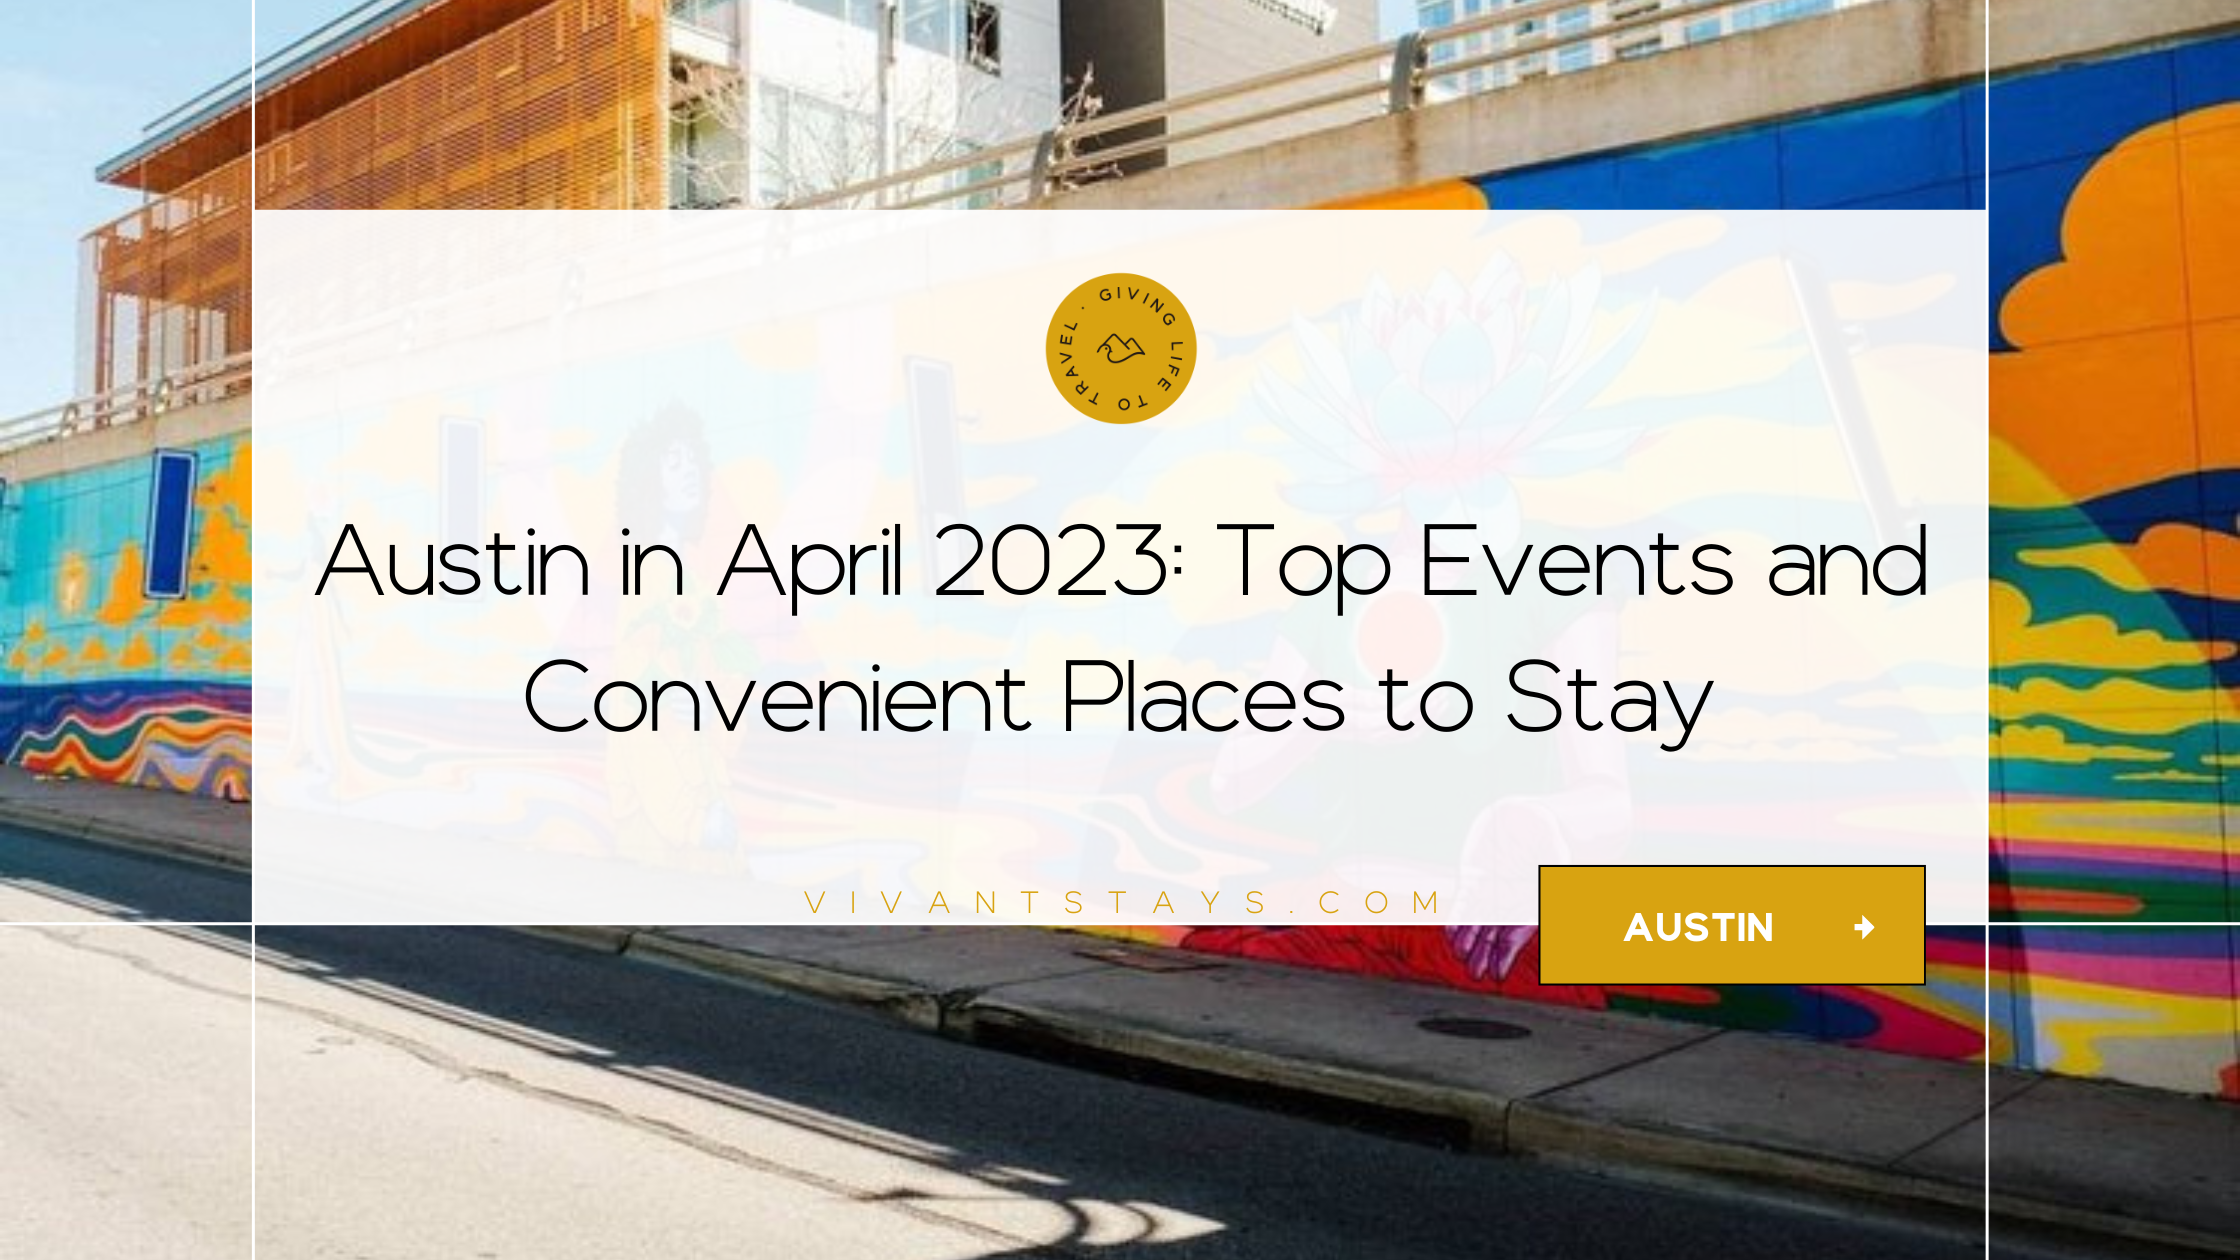 Image of Vivant's cover blog with the title "Austin in April 2023: Top Events and Convenient Places to Stay"